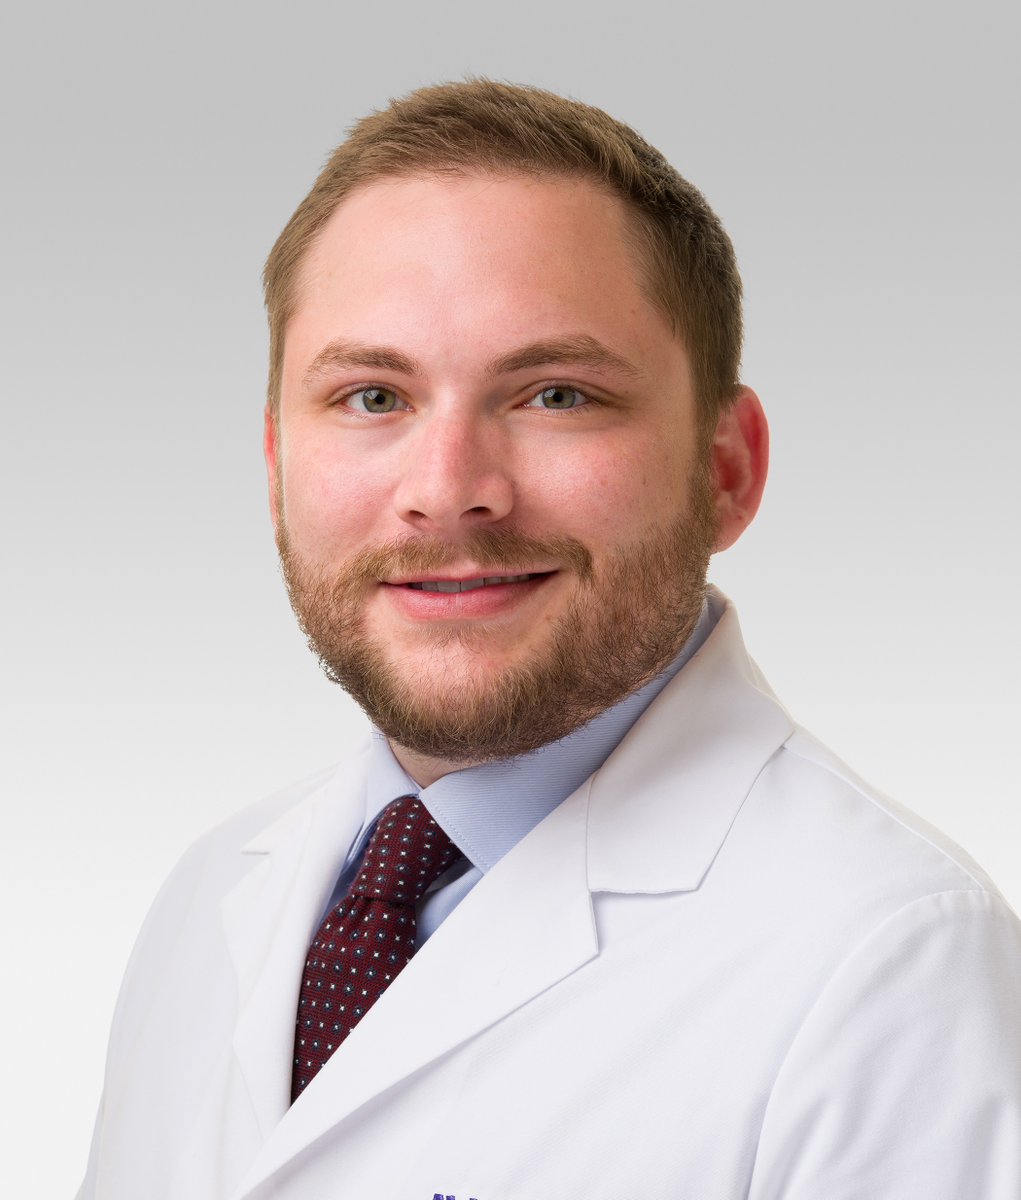 Kudos to Andrew Schleuning (@aschleuning) on his FY24 promotion to Assistant Professor of Medicine! 👏 #Promotion #NMHospMed